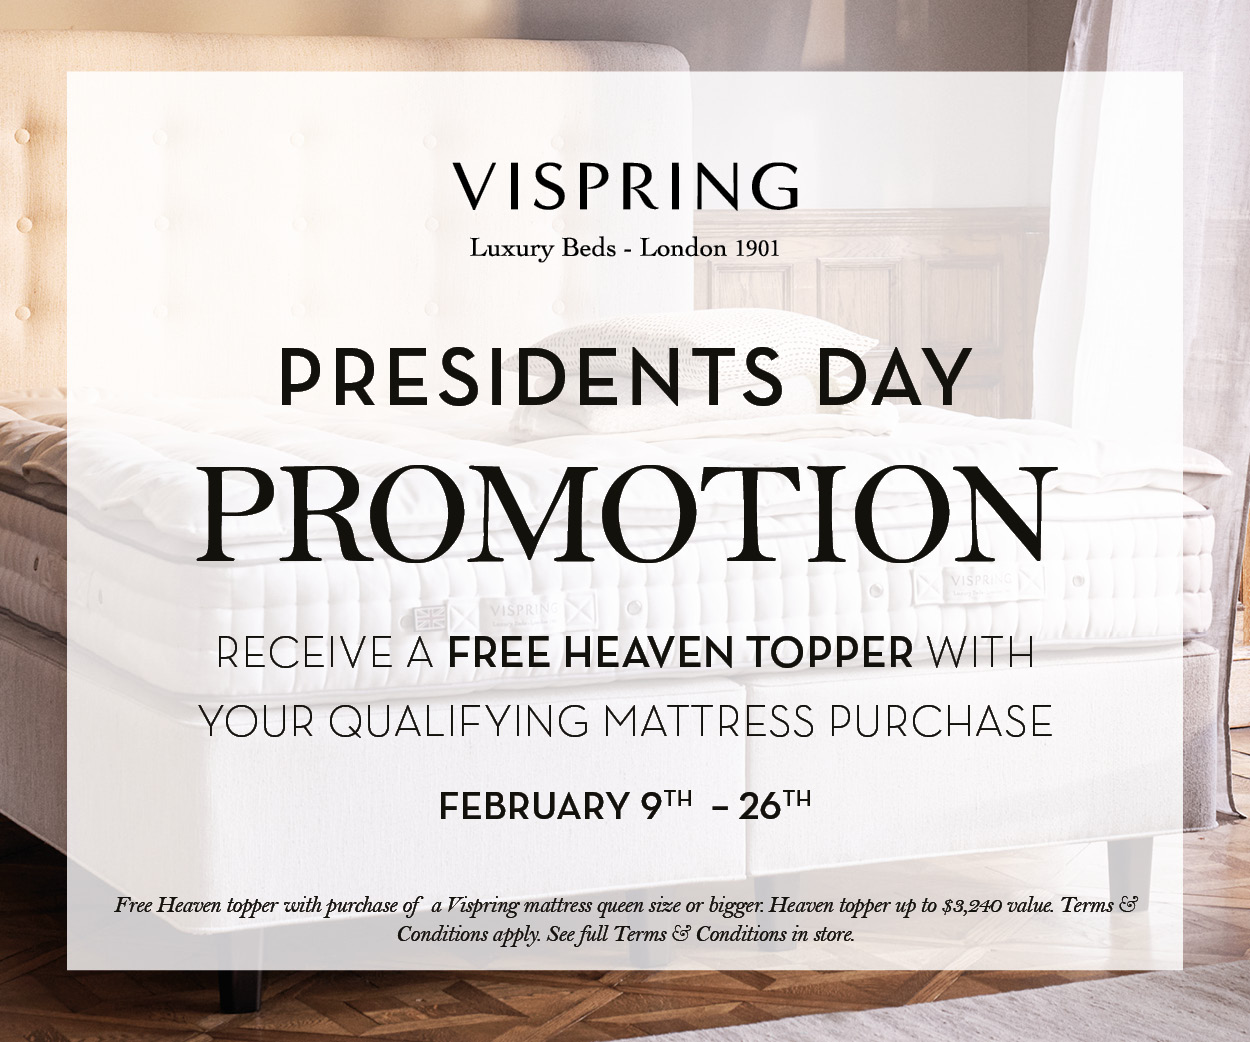 President's Day promotion